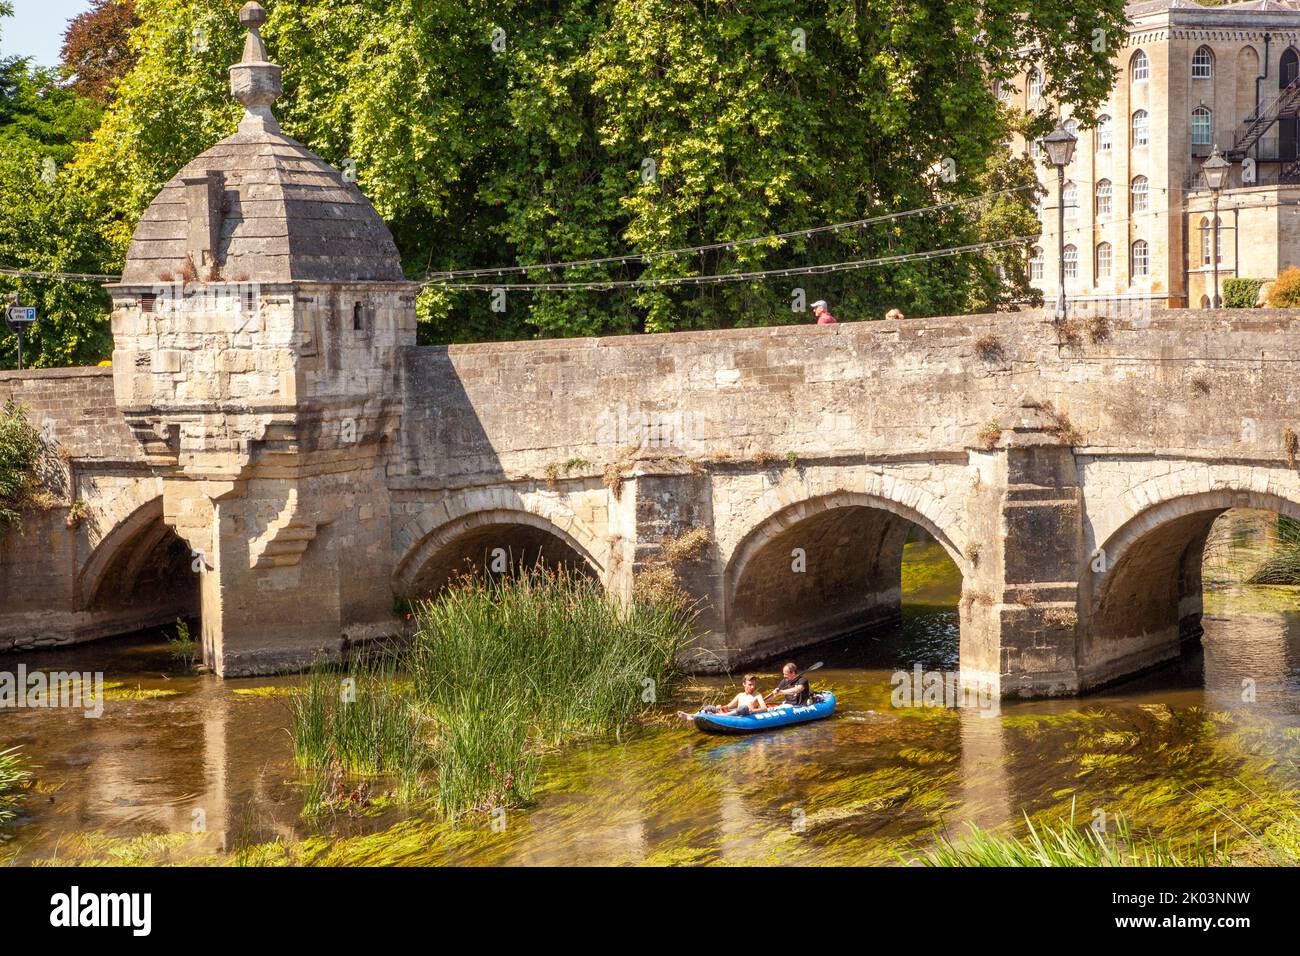 Children in a canoe Kayak on the river Avon passing under the old town bridge in the Wiltshire market town of Bradford on Avon  Wiltshire England Stock Photo